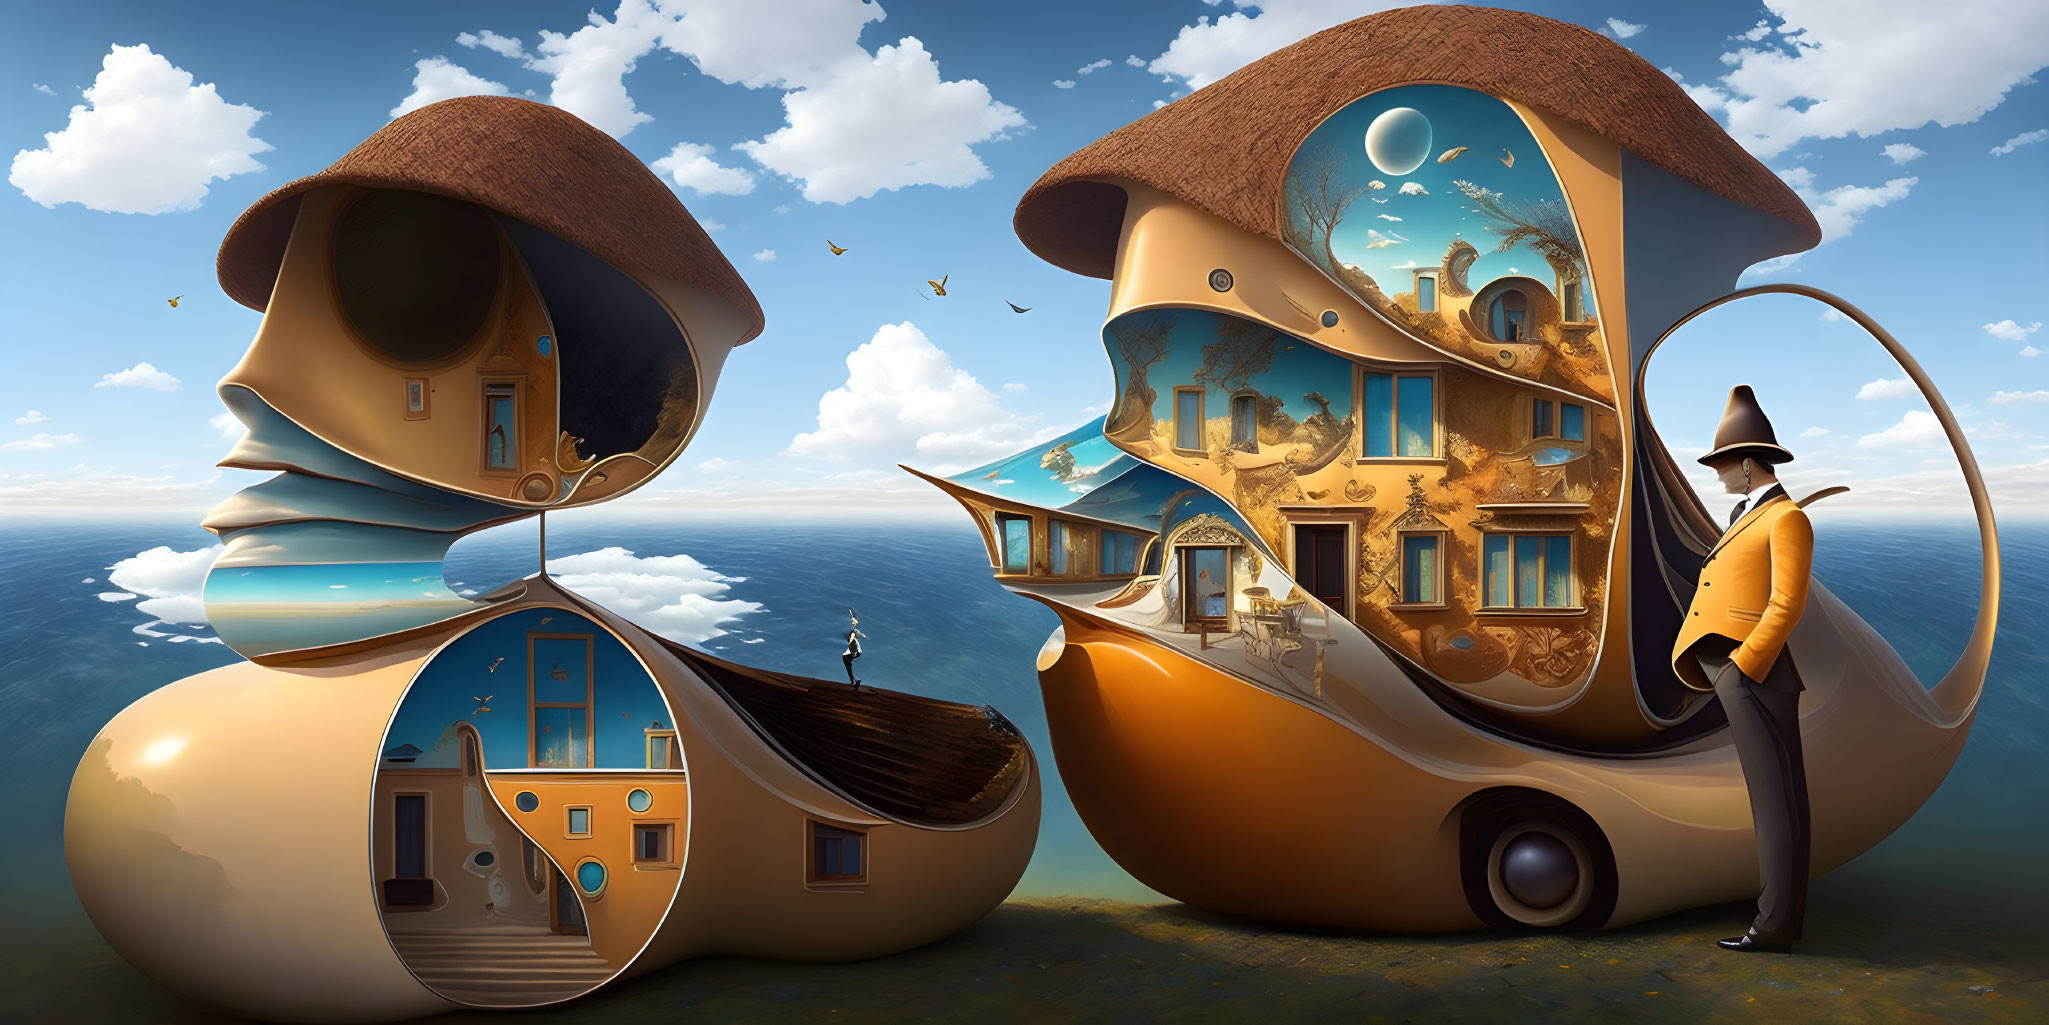 Surreal artwork: man in top hat, whimsical snail-shaped houses on calm sea under